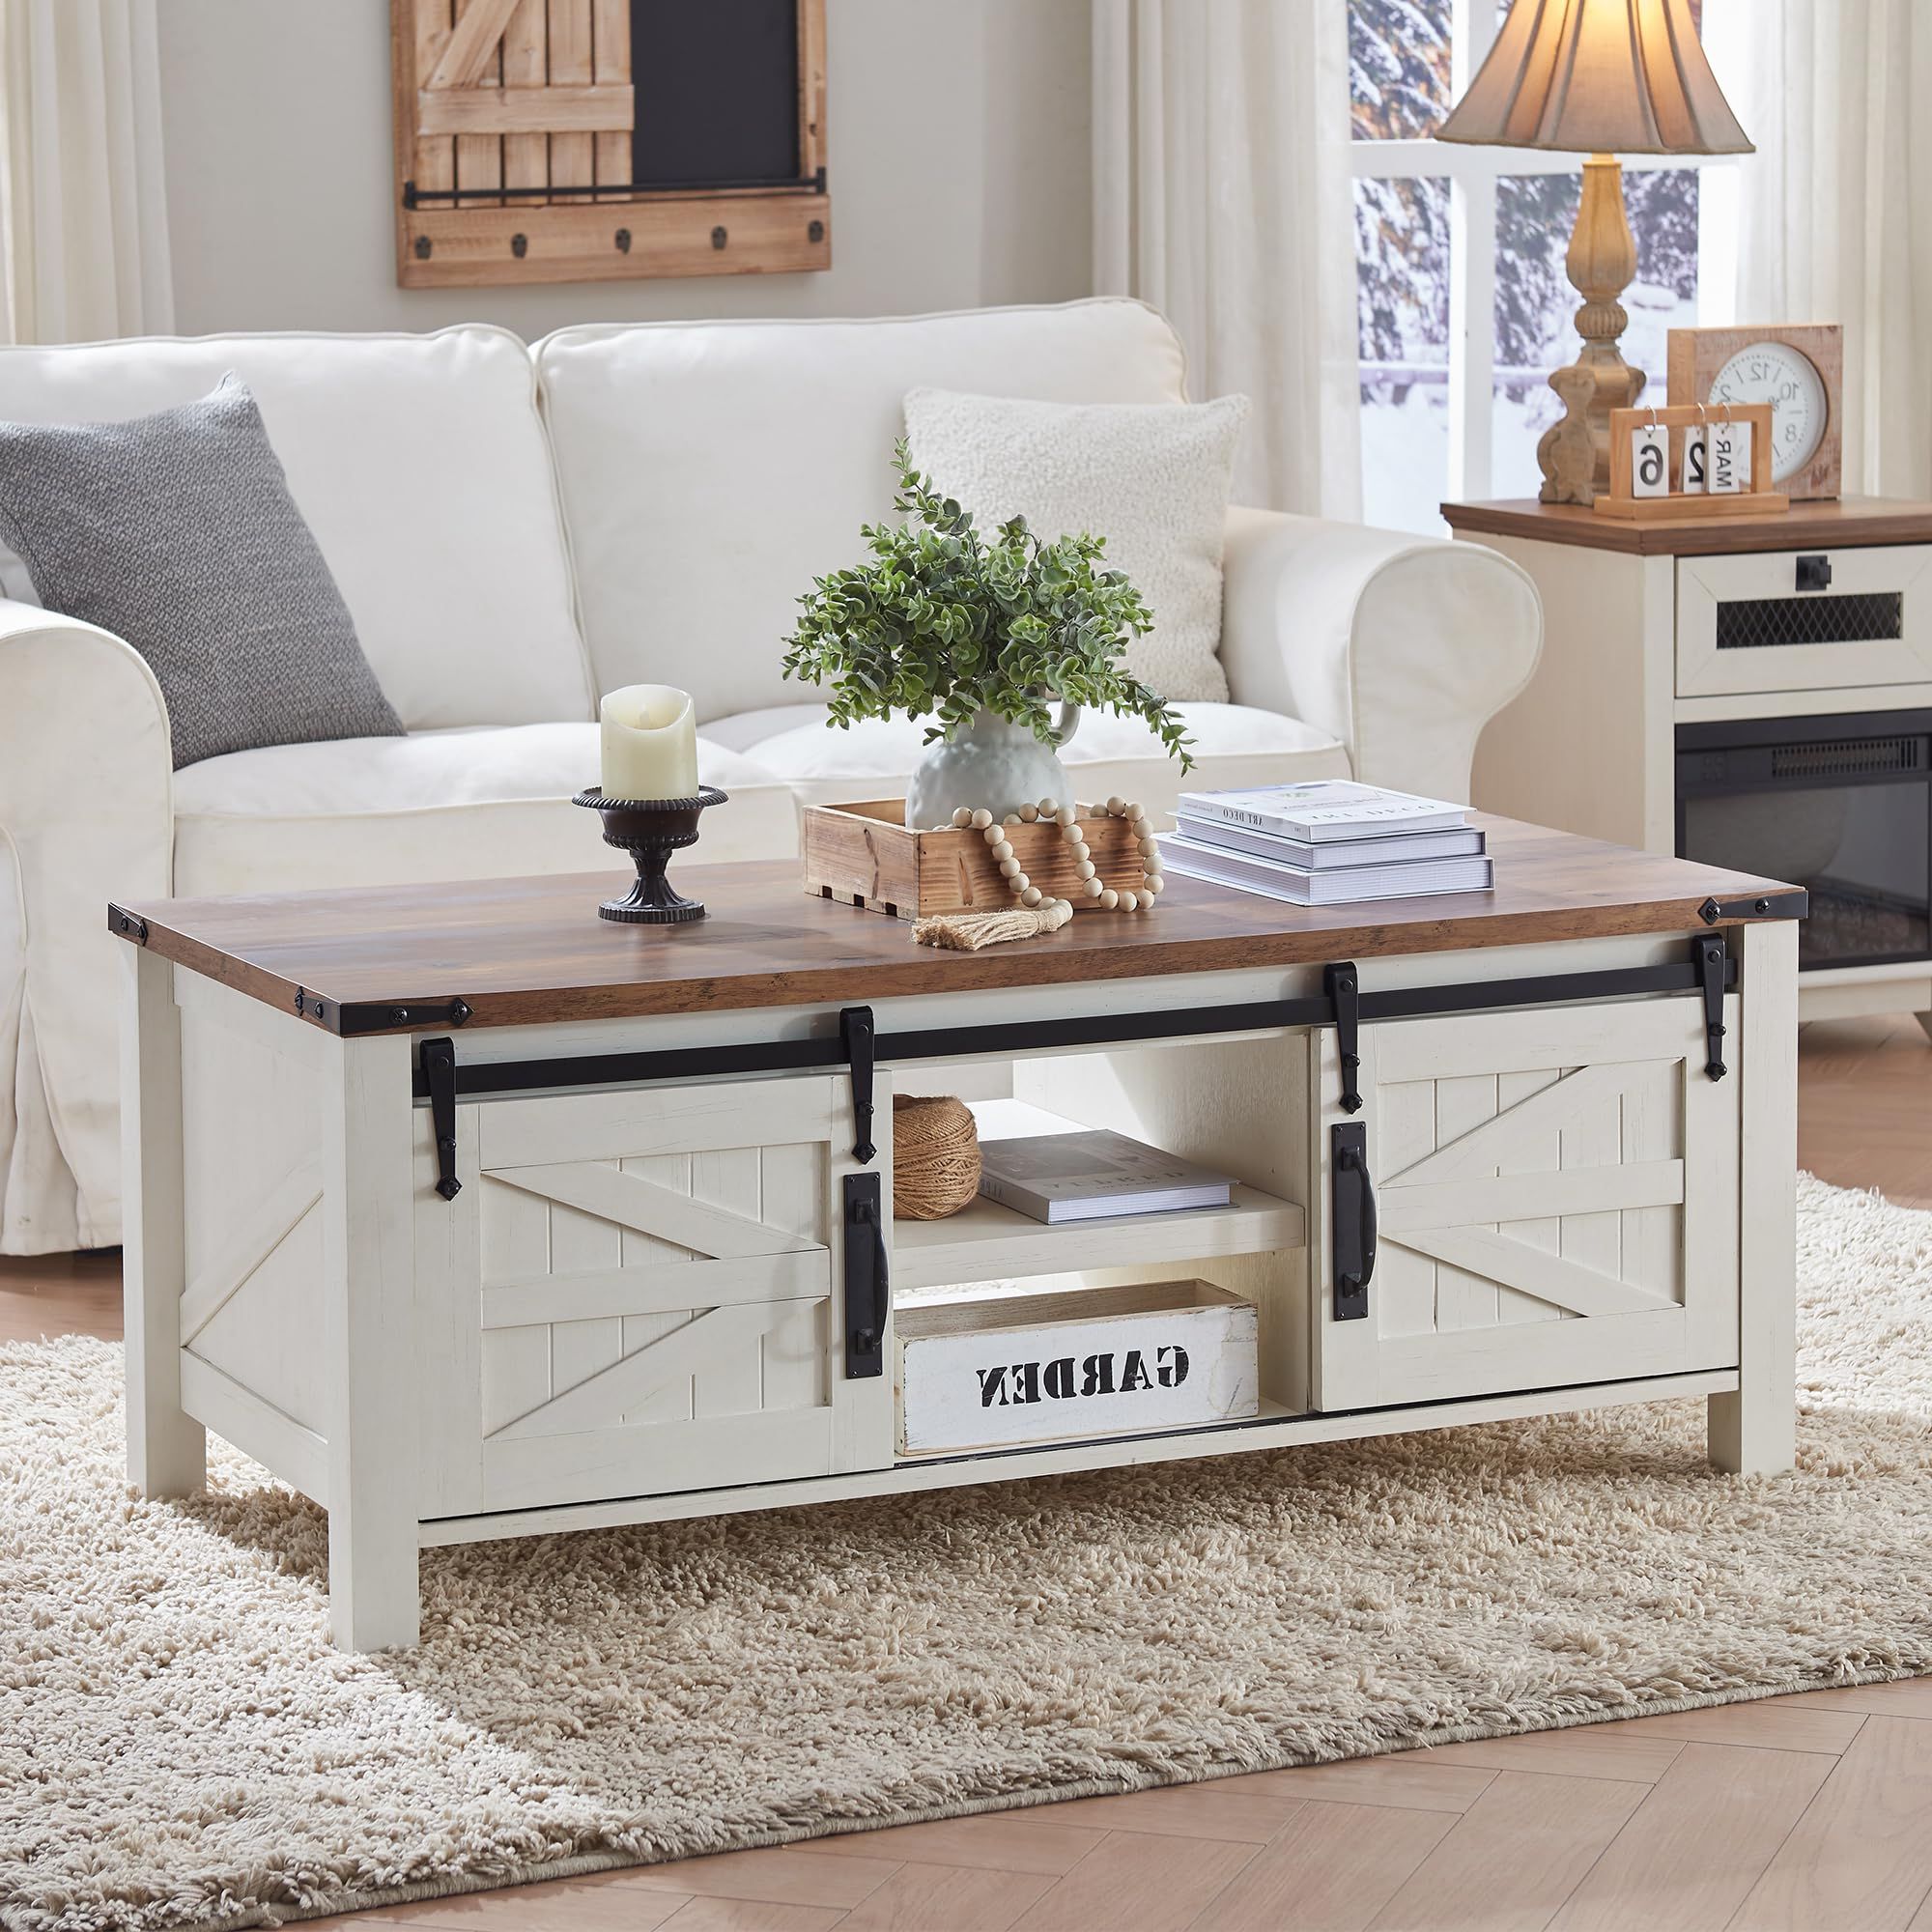 2019 Coffee Tables With Sliding Barn Doors Pertaining To Amazon: Okd Farmhouse Coffee Table, 48" Storage Center Table With Sliding  Barn Doors, Rustic Wood Rectangular Cocktail Table With W/adjustable  Shelves For Living Room, Antique White : Home & Kitchen (View 2 of 10)